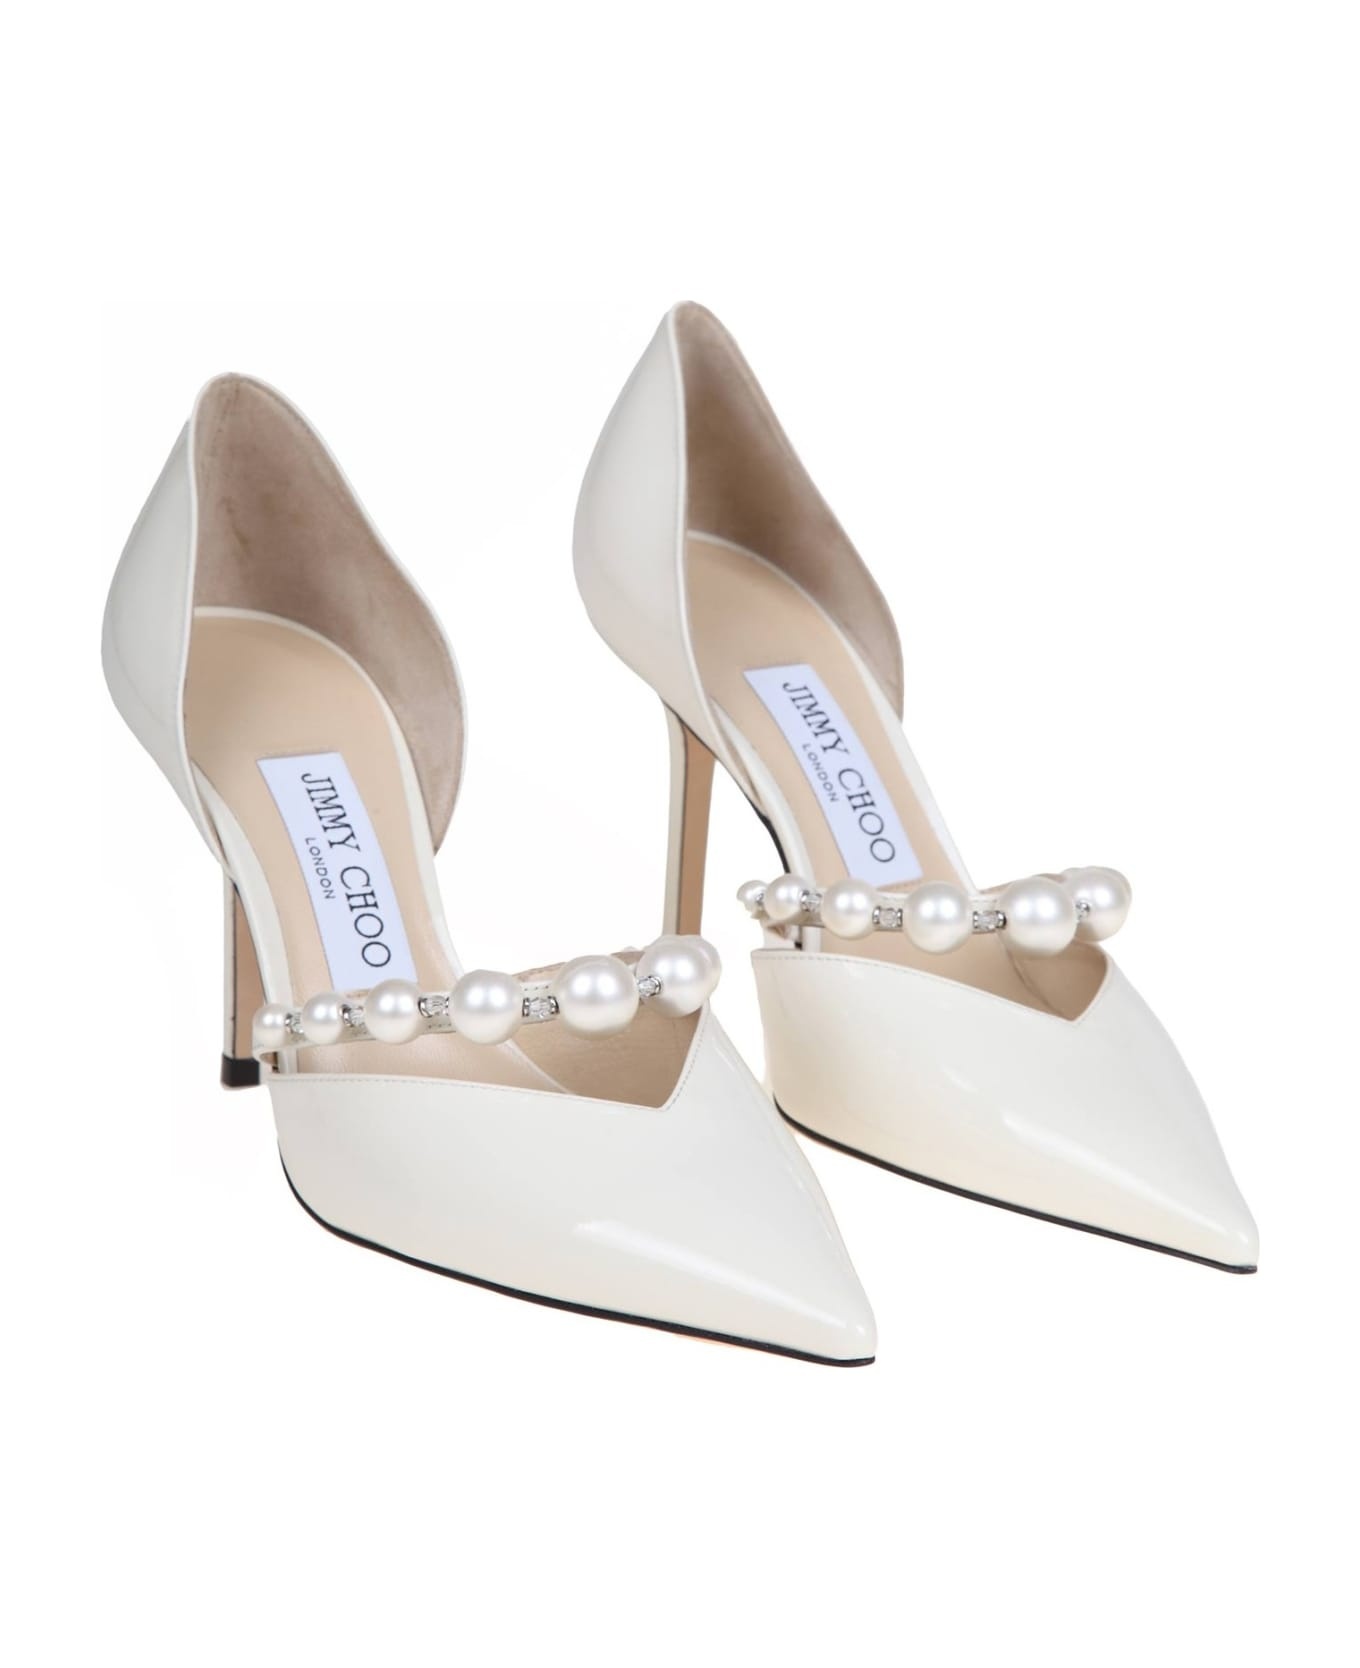 Aurelie 85 Patent Leather Pumps With Applied Pearls - 2